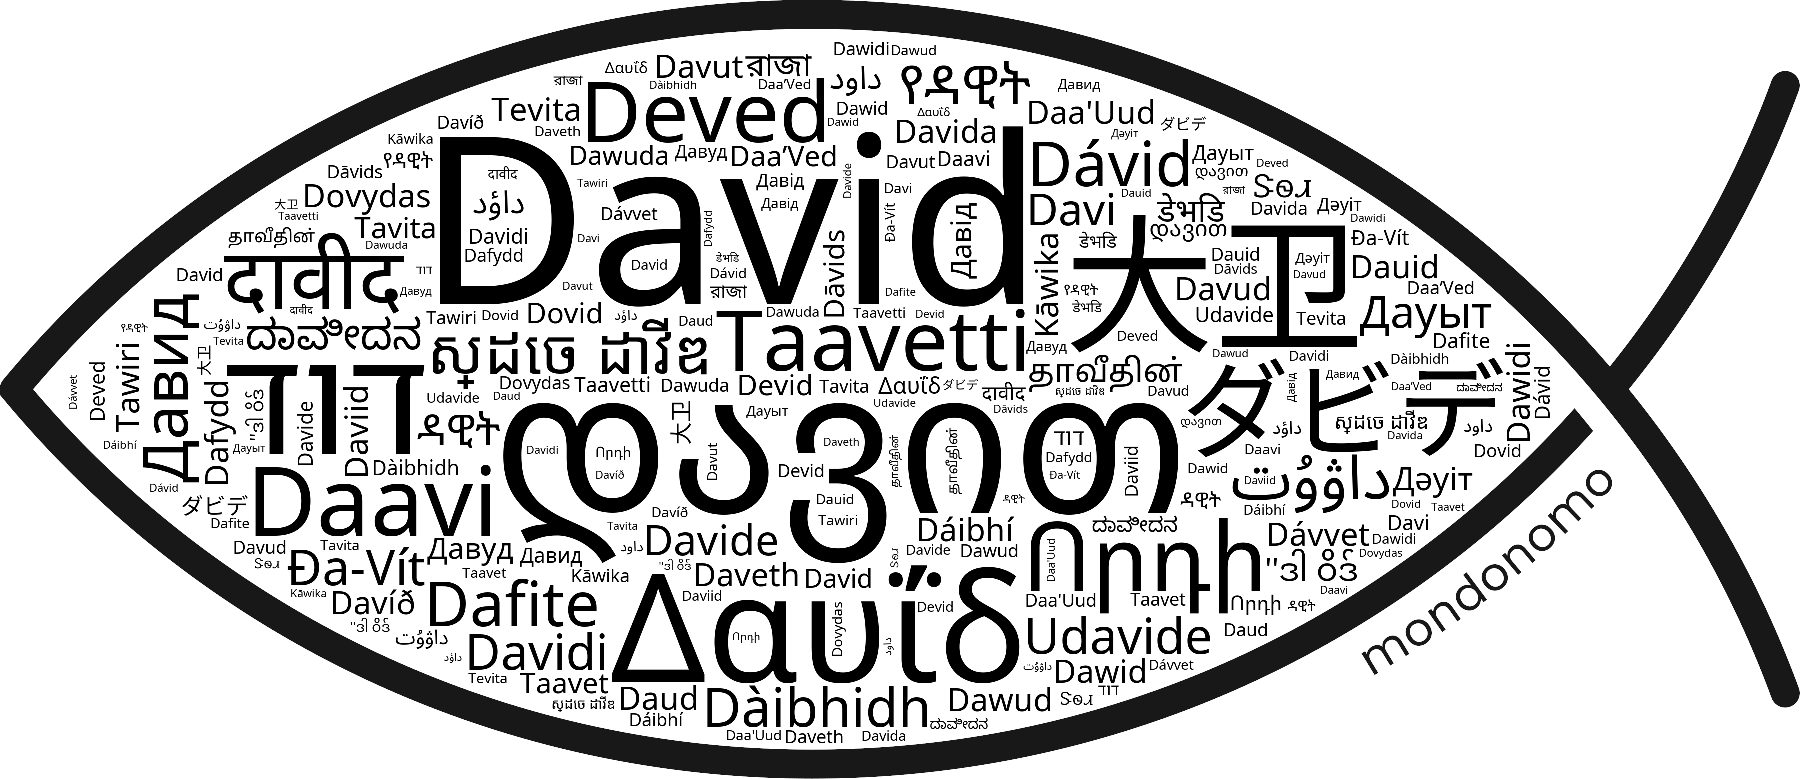 Name David in the world's Bibles